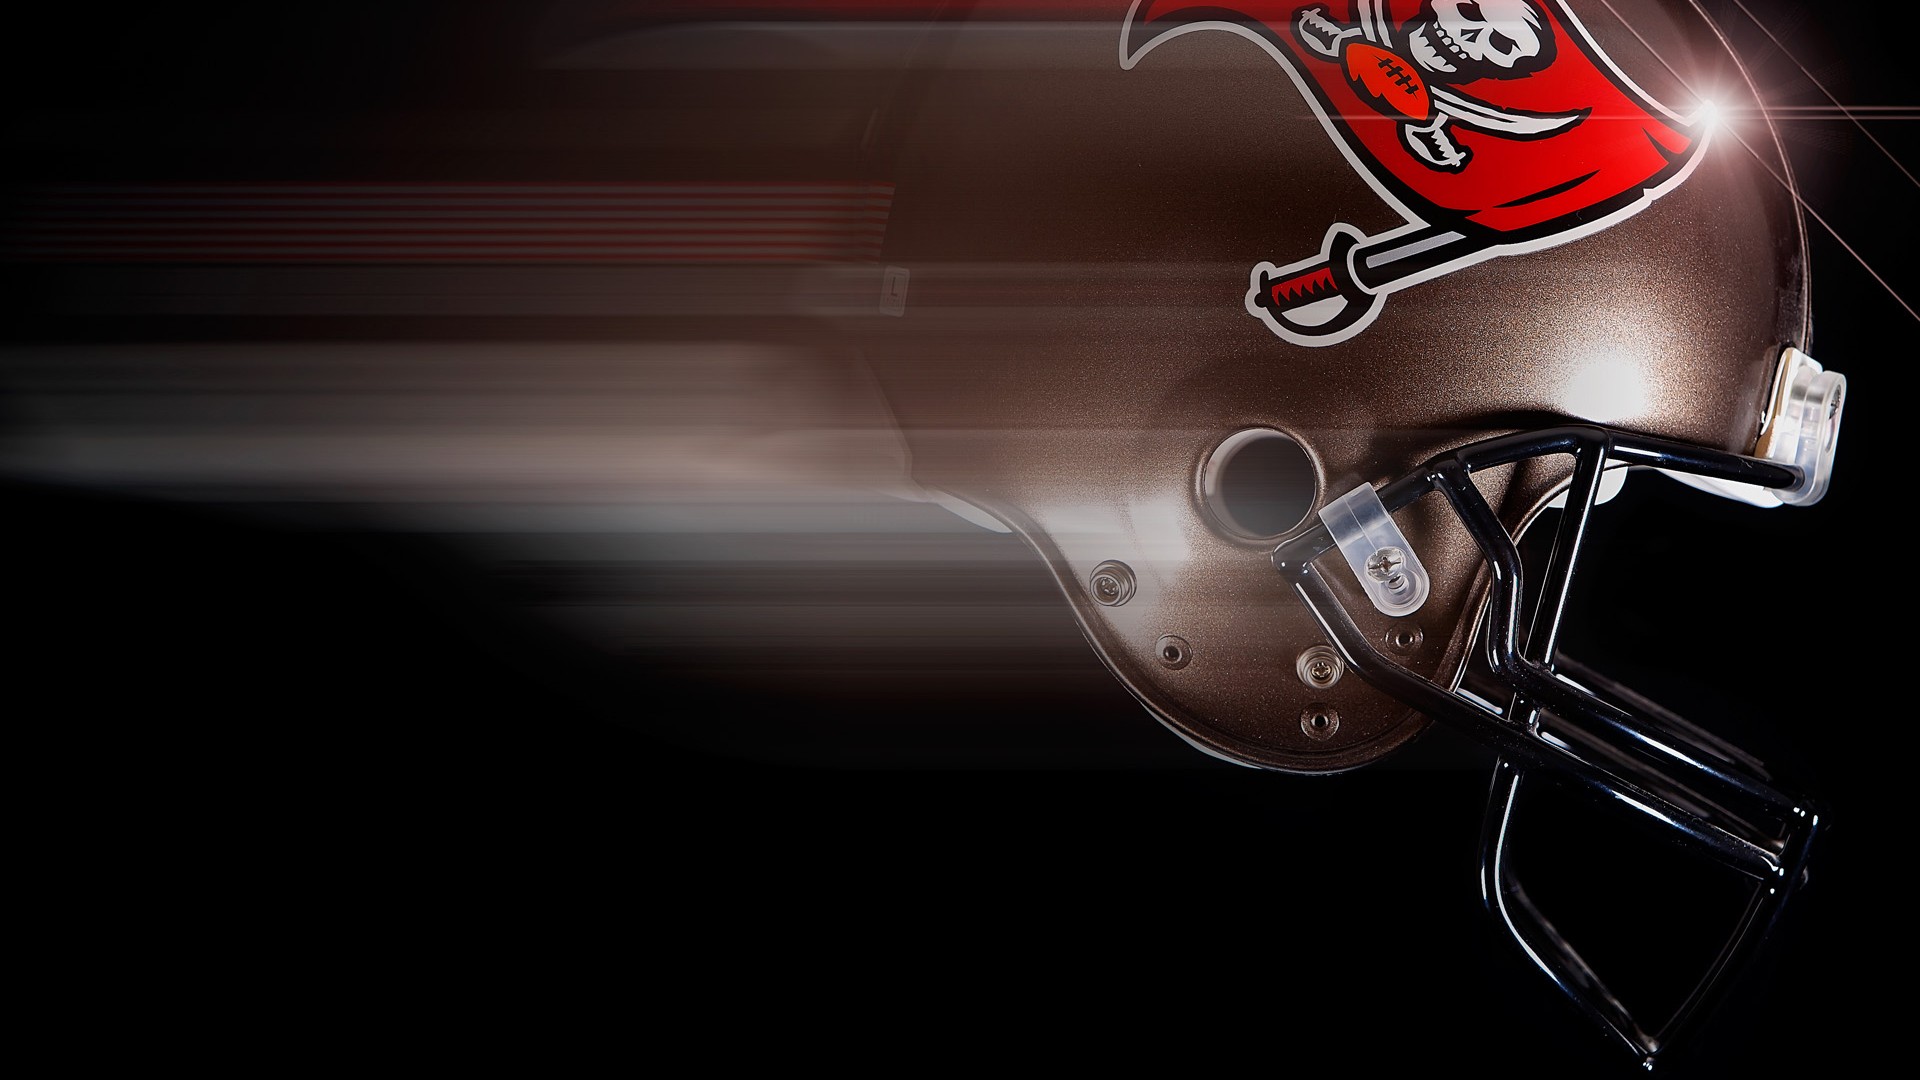 Tampa Bay Buccaneers Mac Wallpaper With high-resolution 1920X1080 pixel. Download and set as wallpaper for Desktop Computer, Apple iPhone X, XS Max, XR, 8, 7, 6, SE, iPad, Android